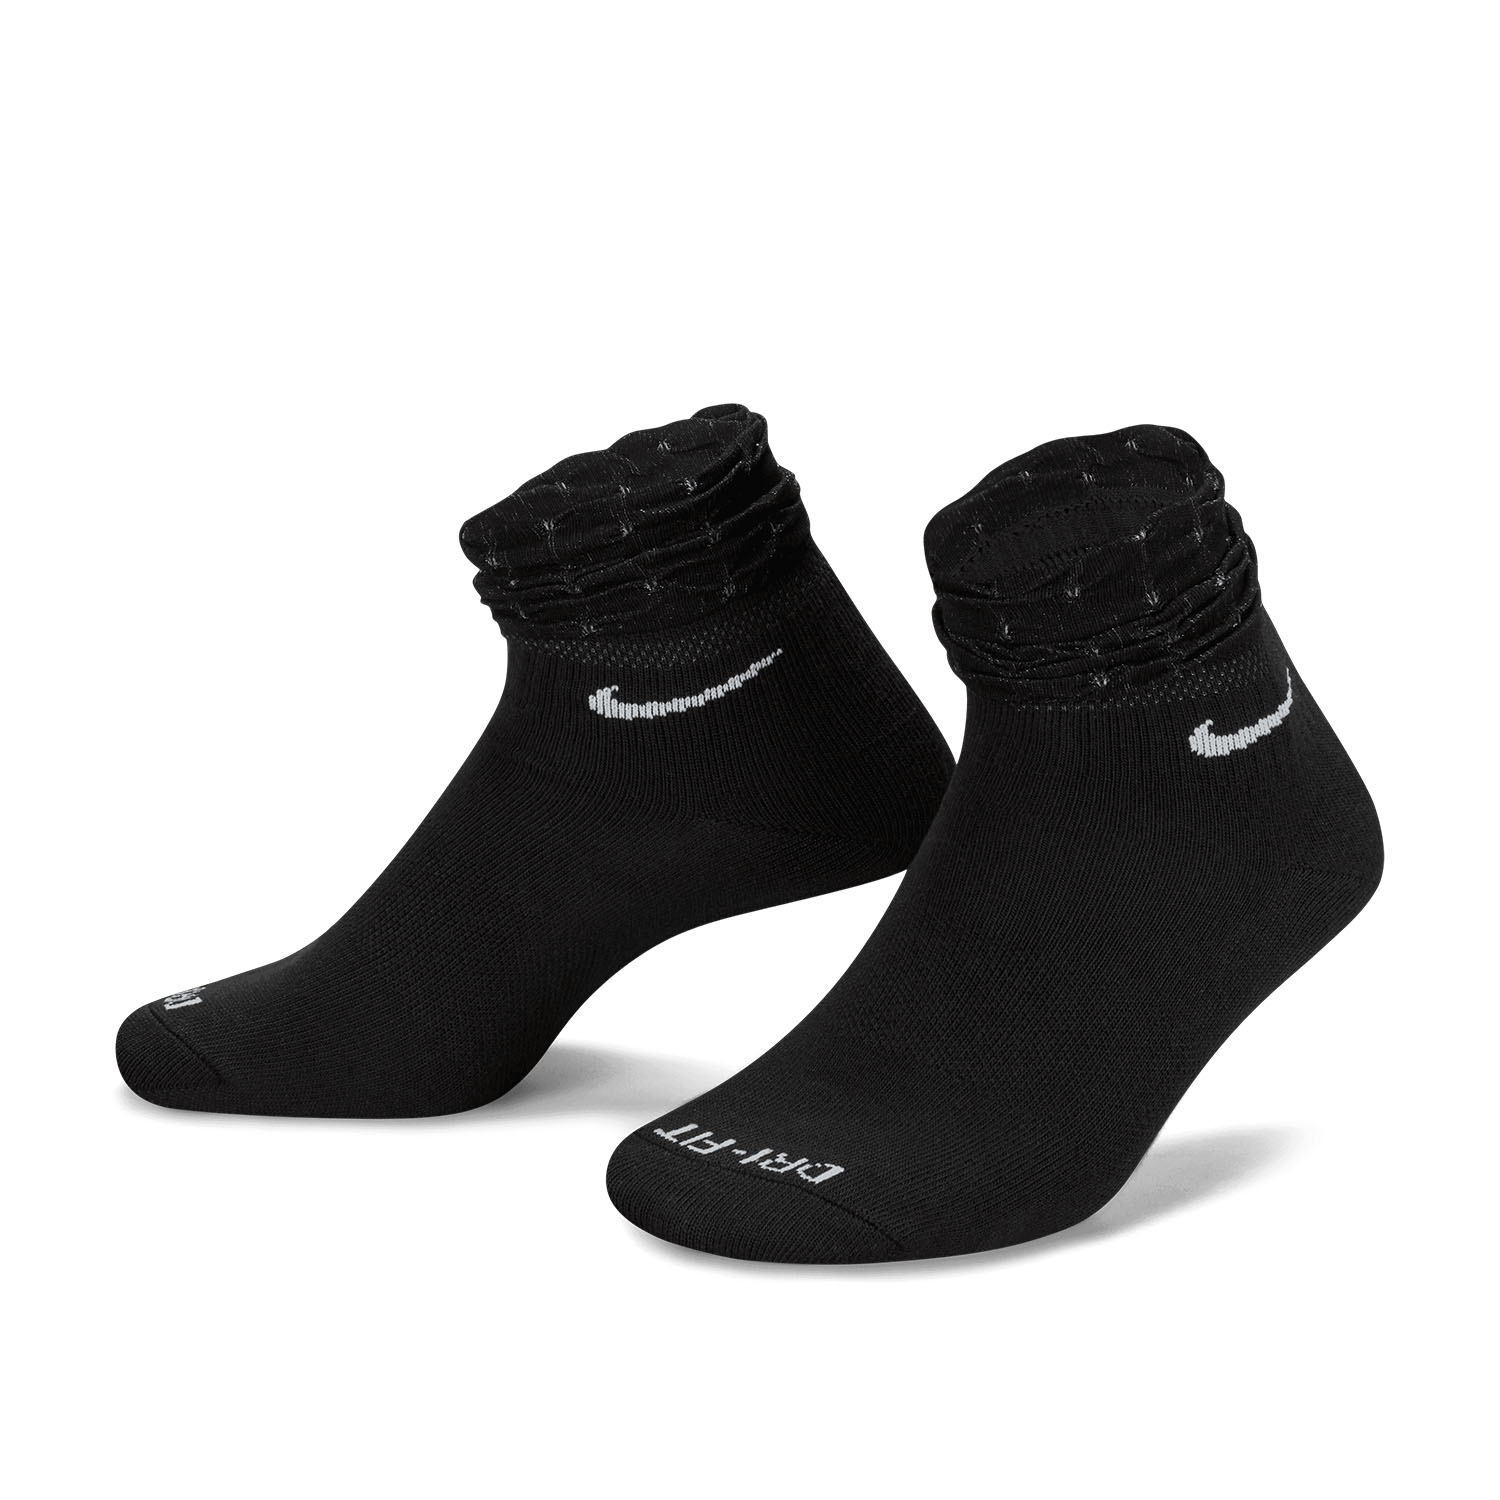 Nike Dri-FIT Gym Calcetines Entrenamiento Mujer - Black/White